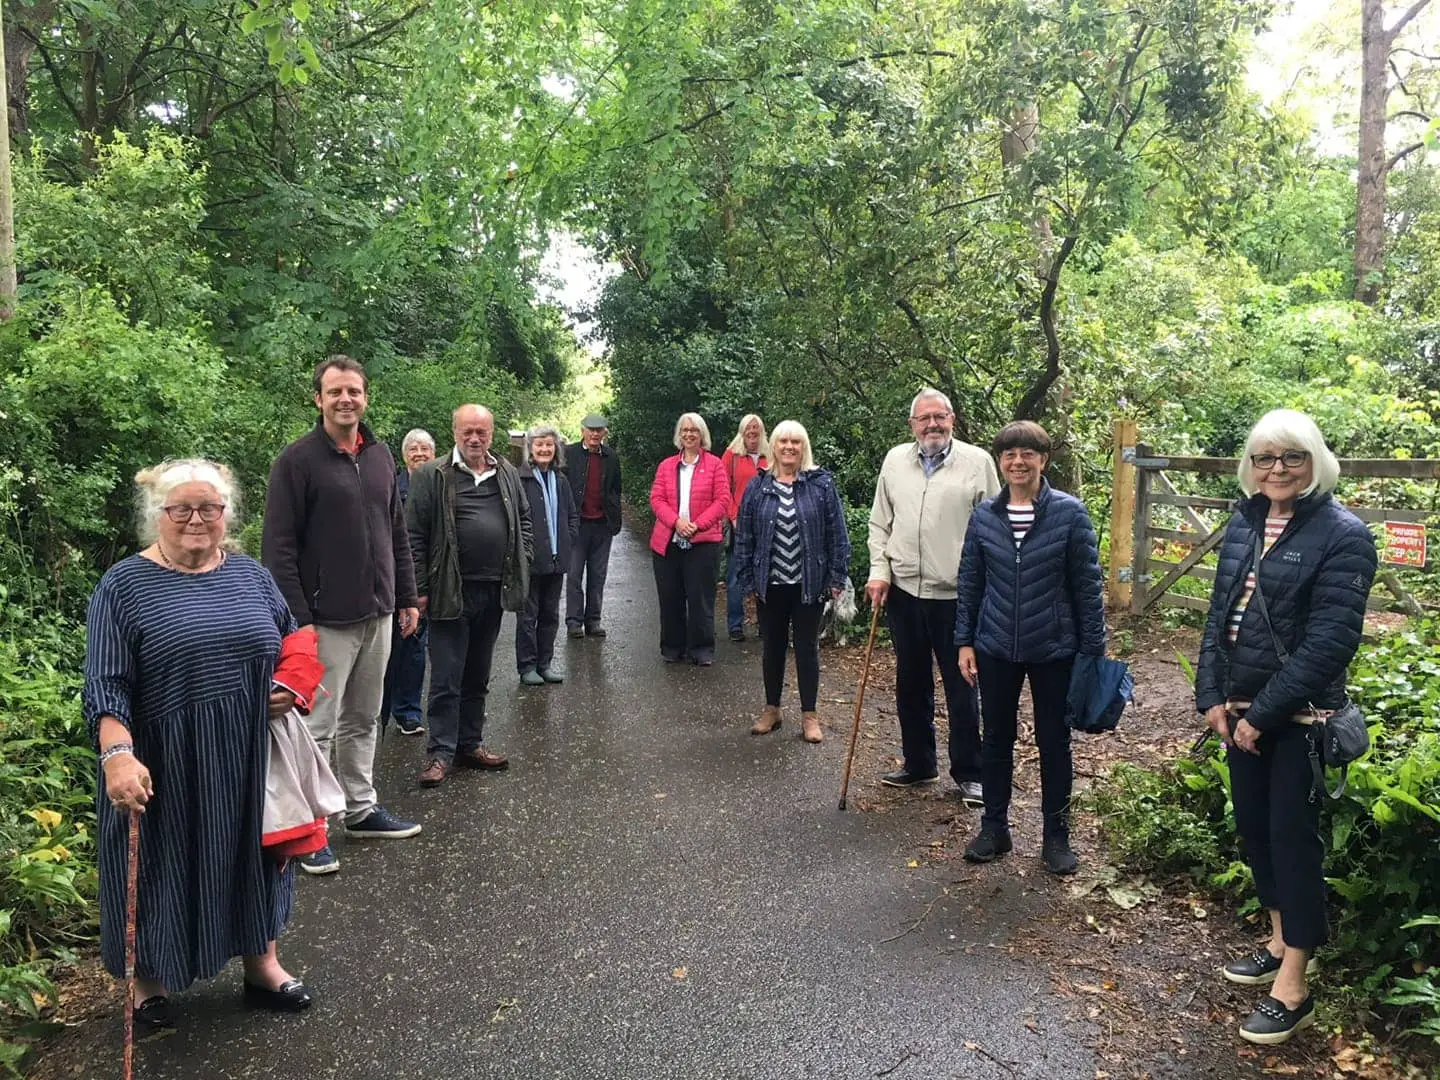 Residents and Cllr Robertson in Love Lane